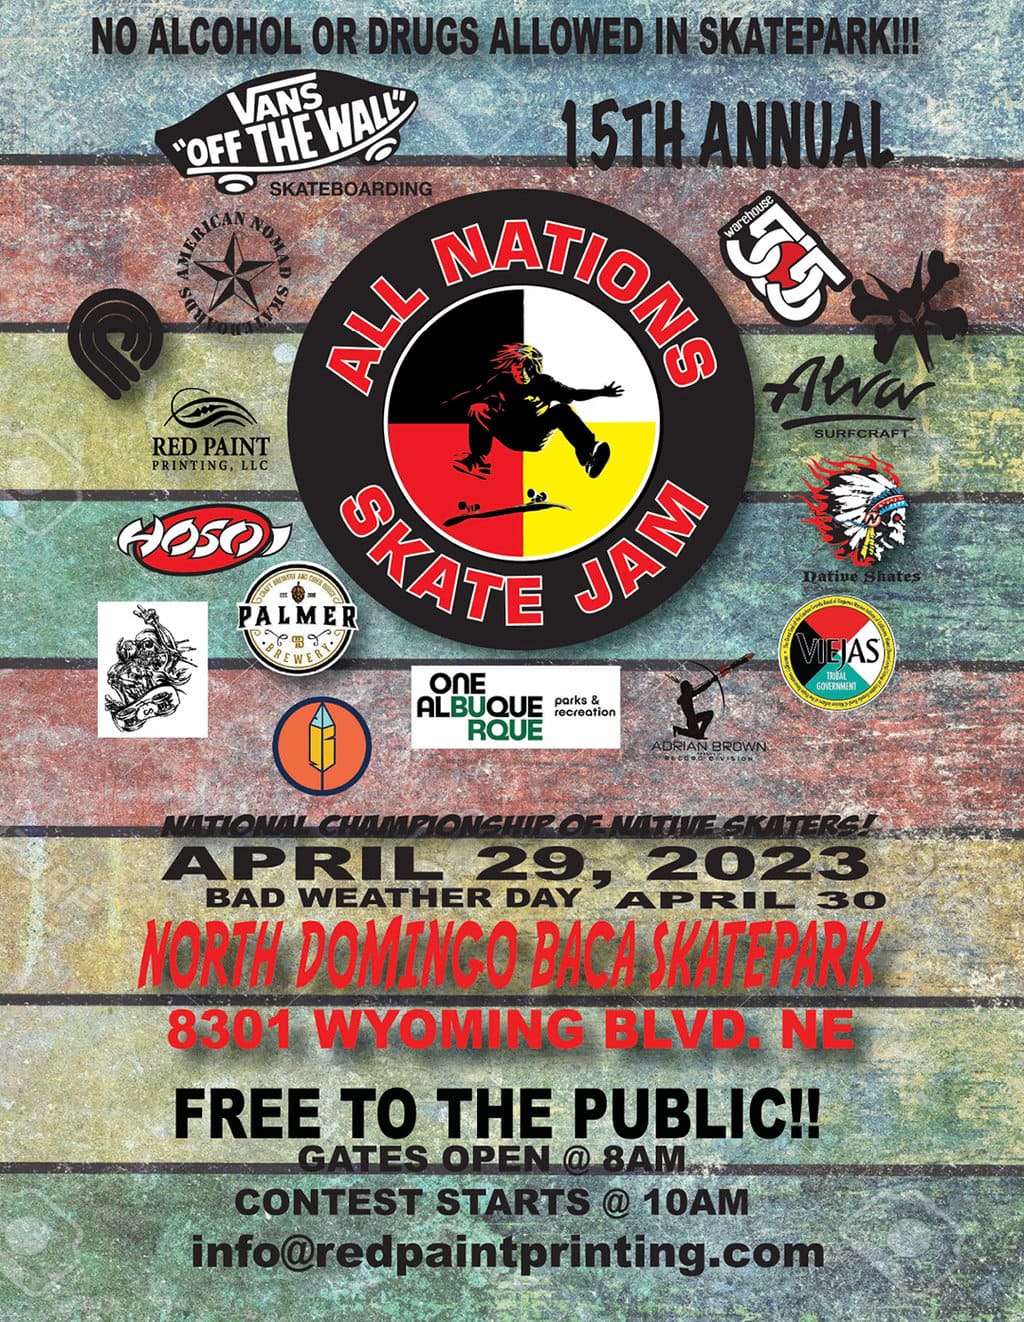 15th Annual All Nations Skate Jam 2023